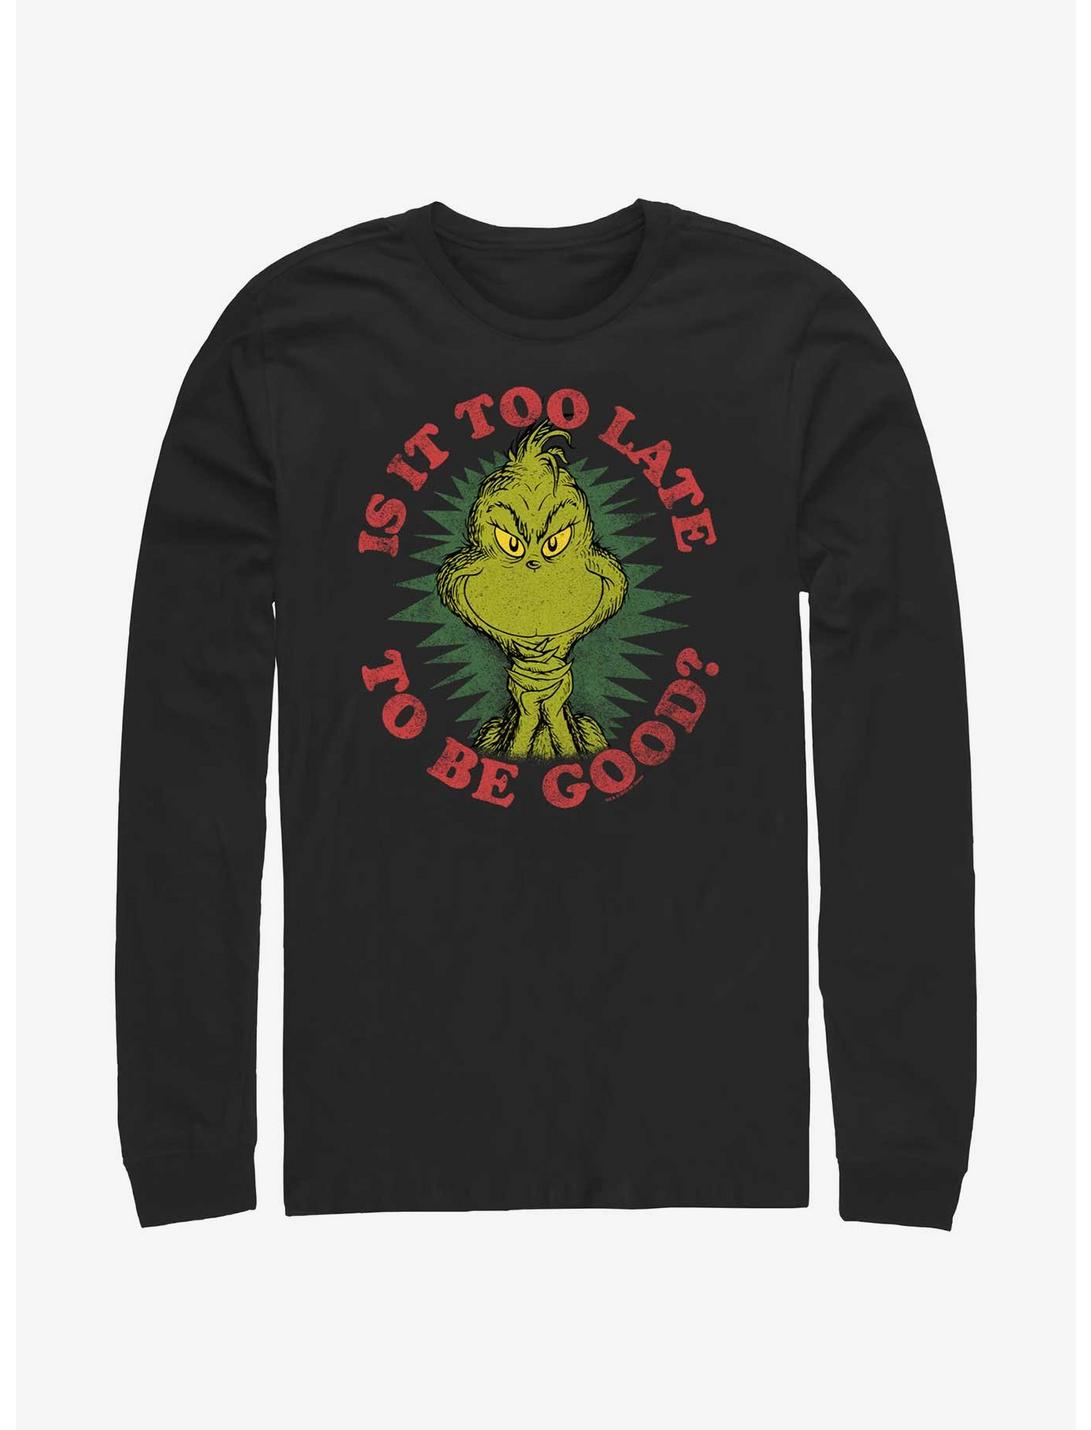 Dr. Seuss Grinch Is It Too Late To Be Good Long-Sleeve T-Shirt, BLACK, hi-res